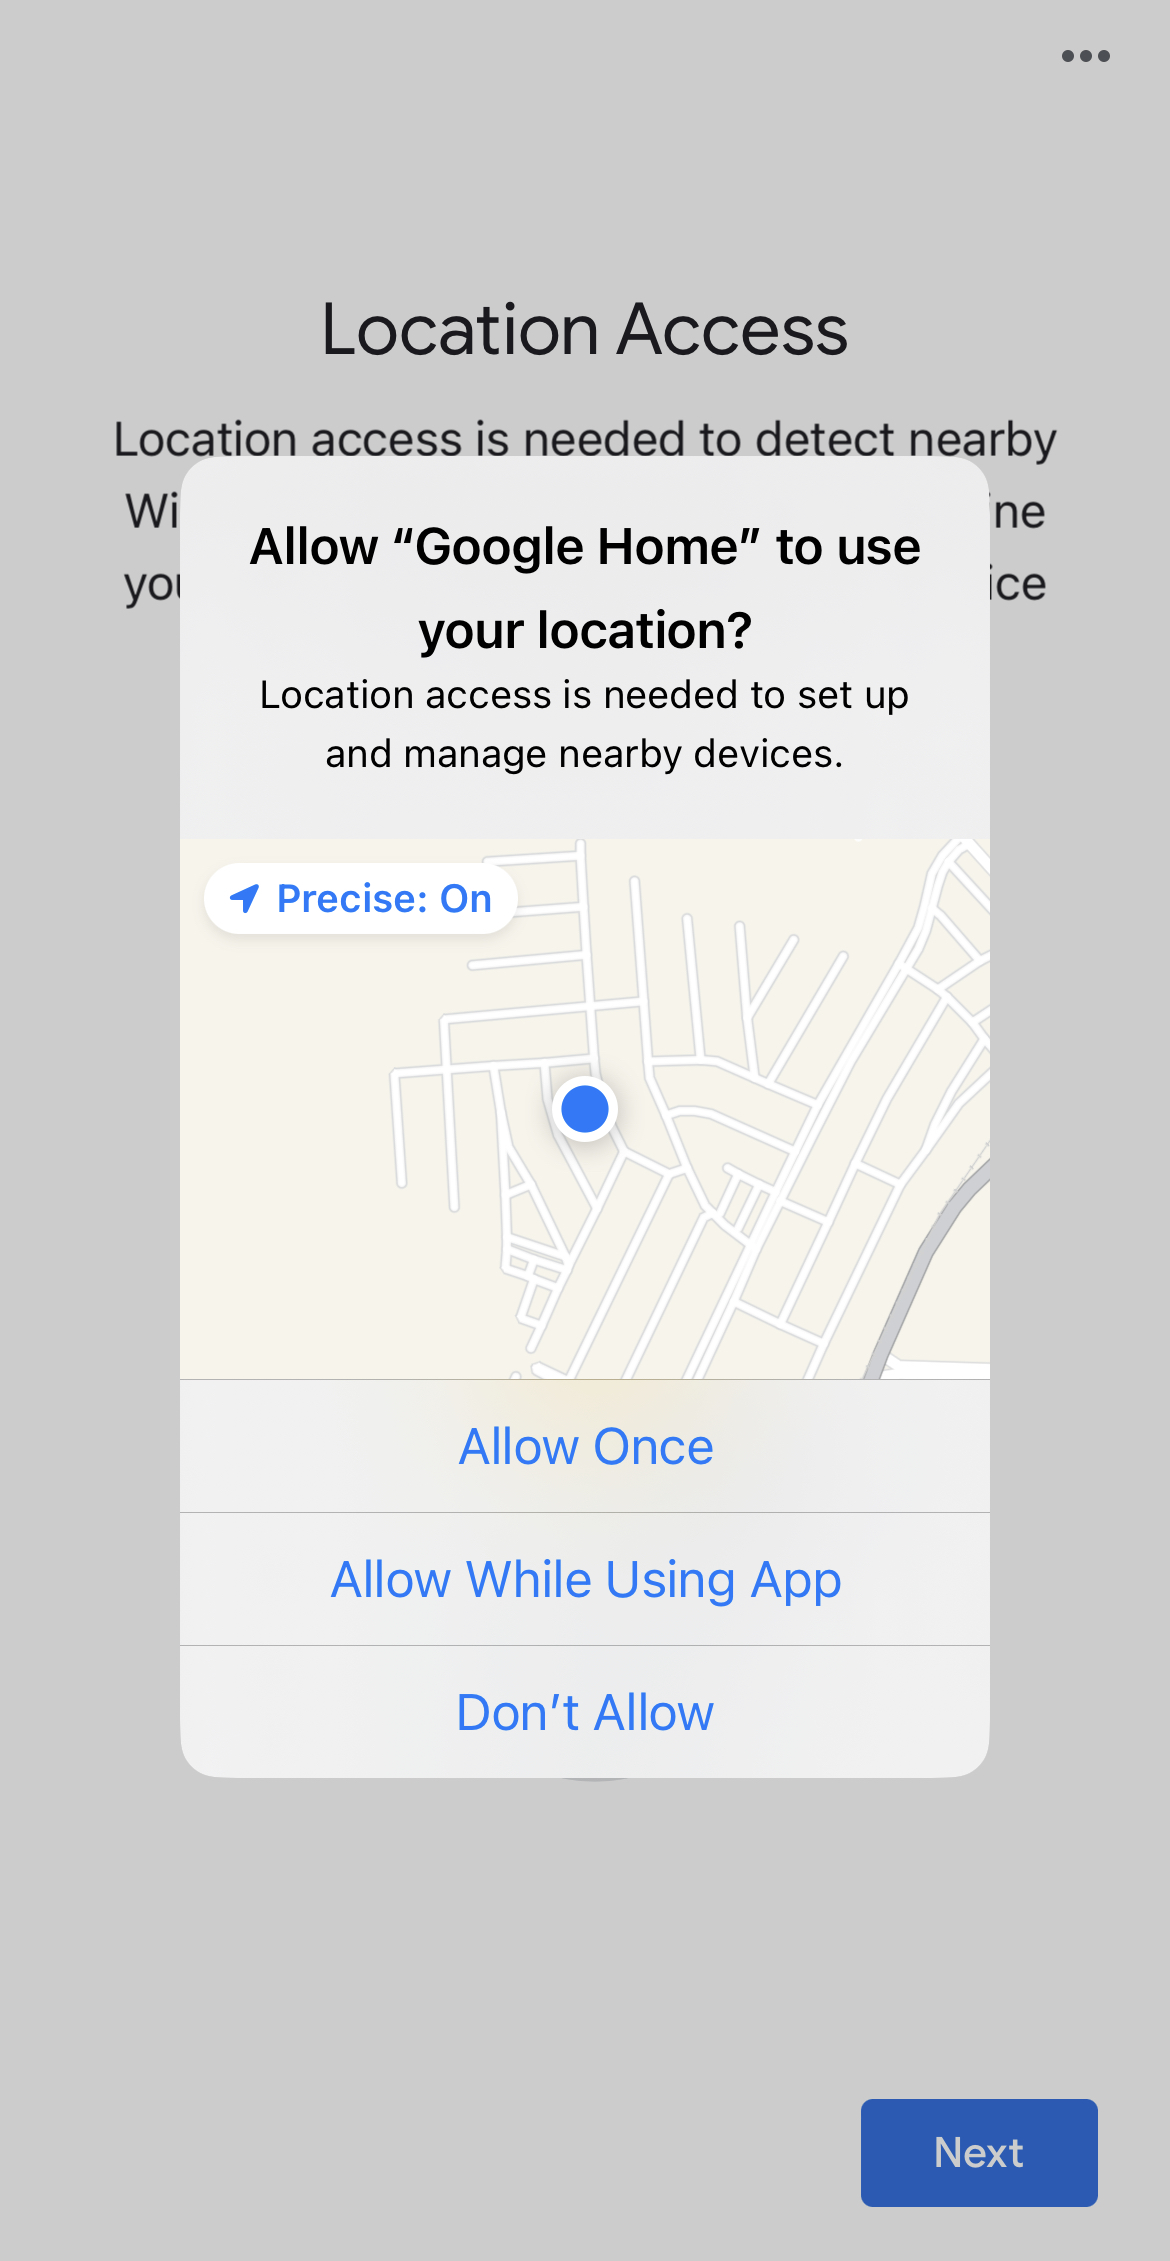 Letting Google Home access your location